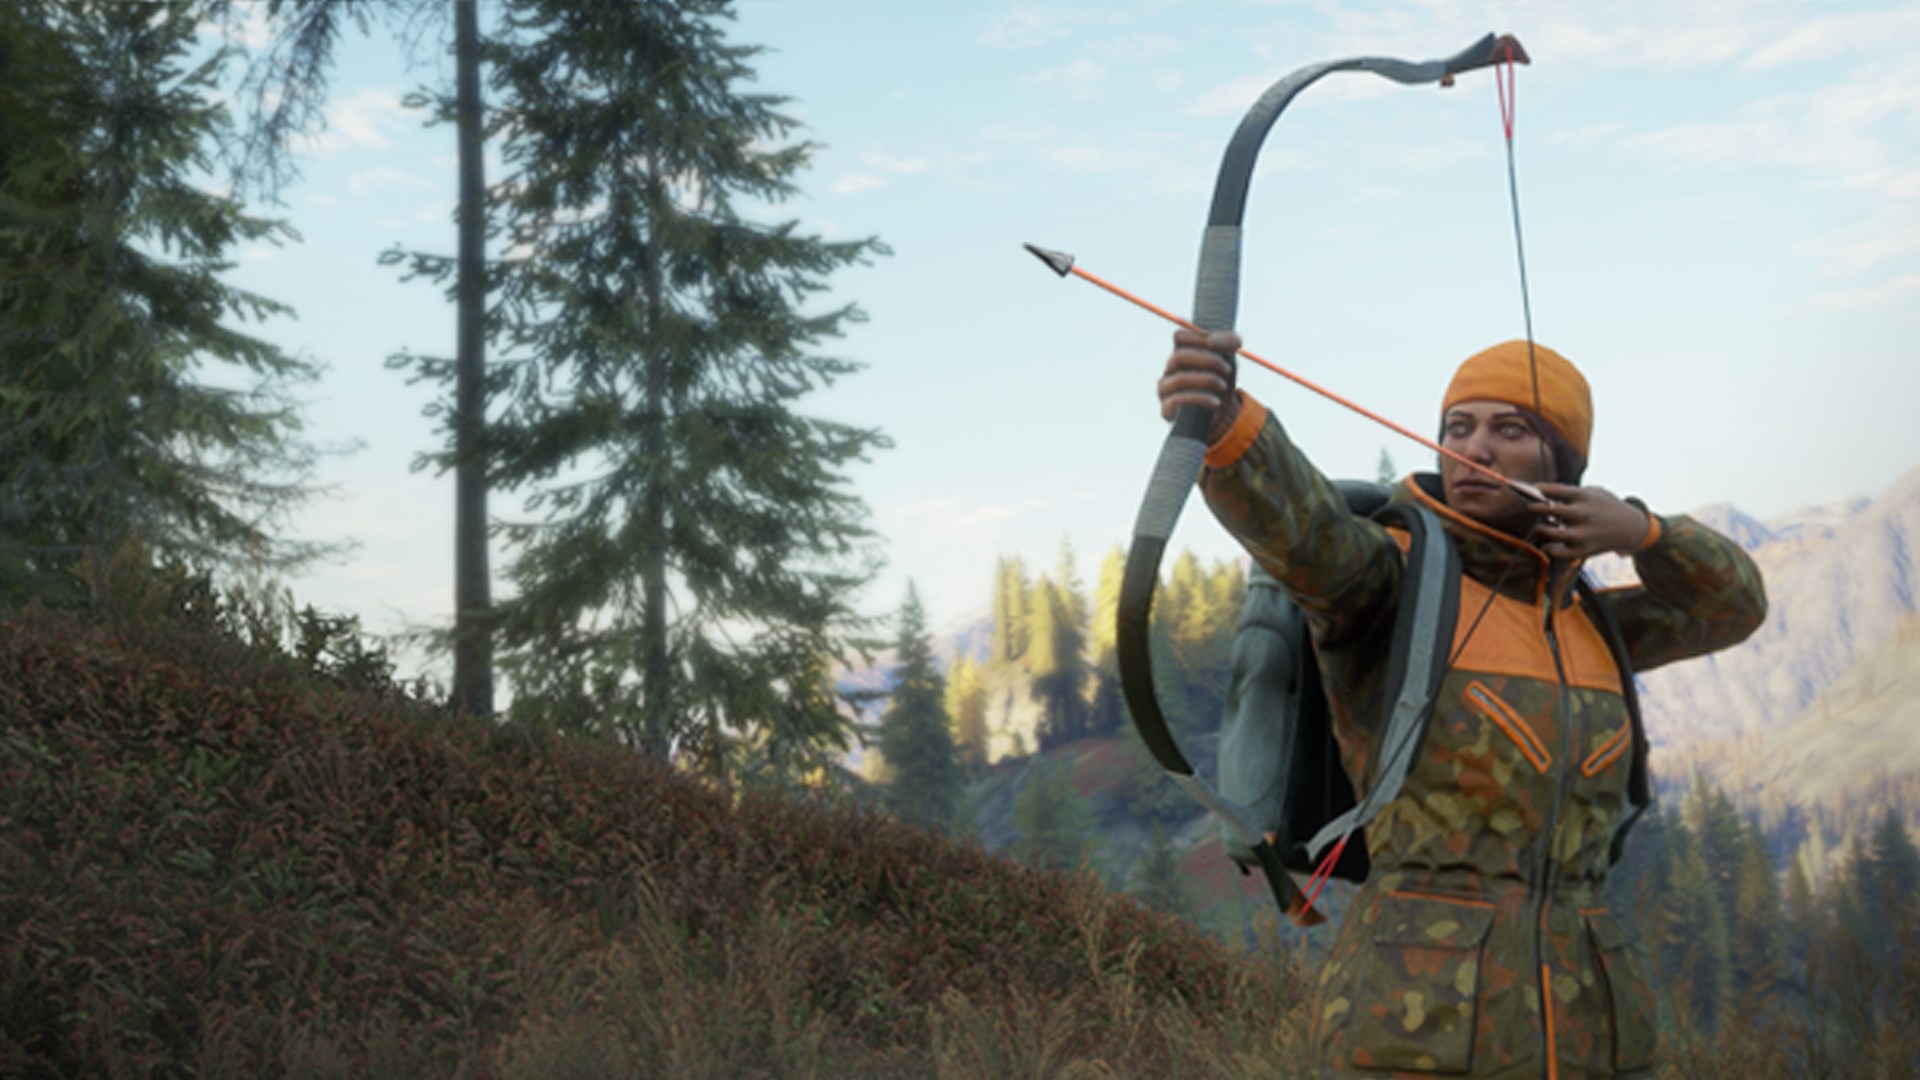 Call of the wild epic games. THEHUNTER Call of the Wild - Weapon Pack 1. The Hunter Call of the Wild арбалет. The Hunter 2017. The Hunter Call of the Wild лук.